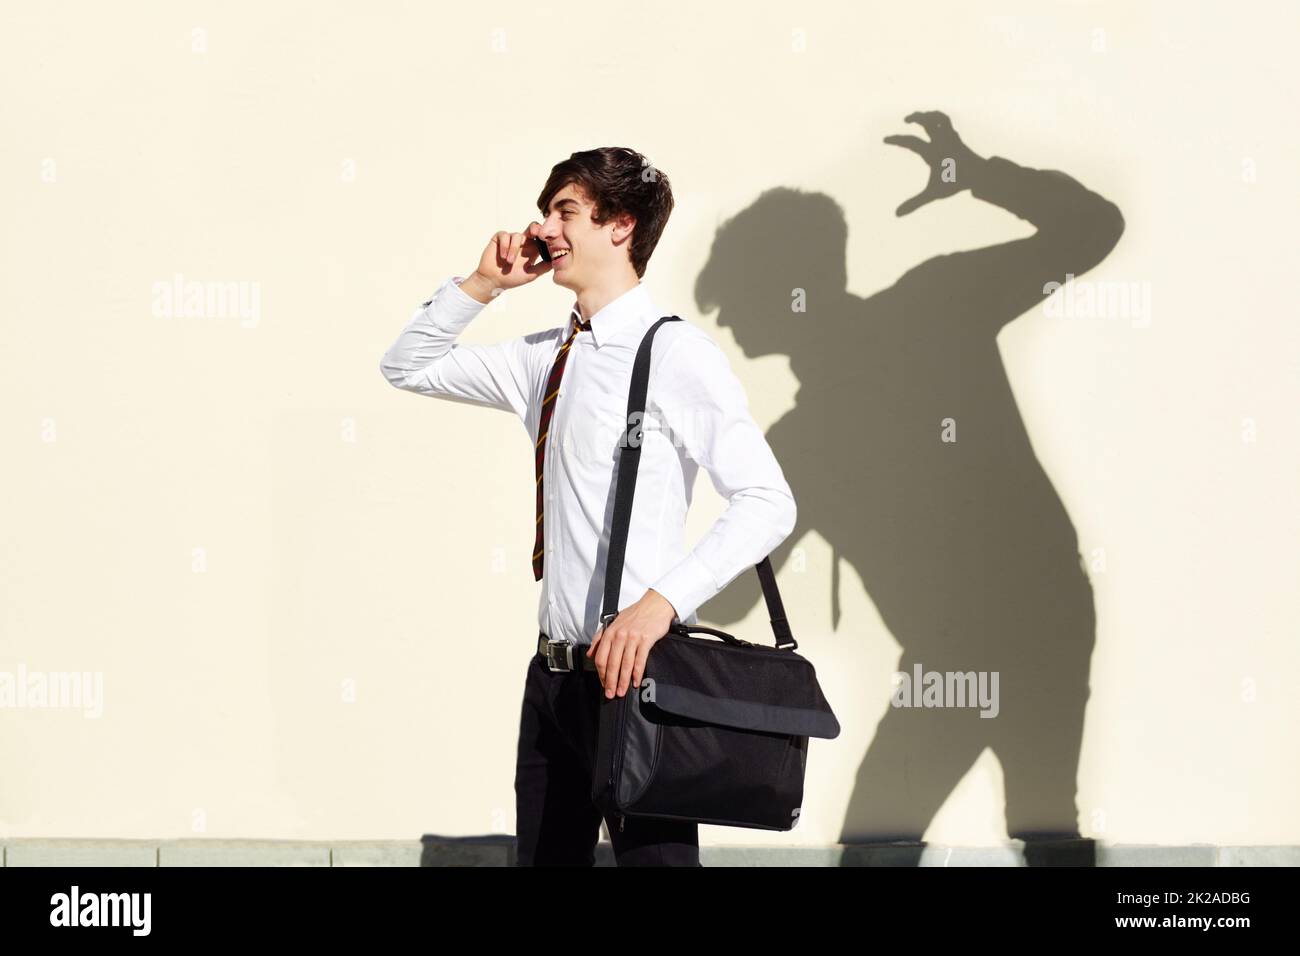 His fears are never far behind him. Shot of a young man being stalked by a ominous shadow of himself. Stock Photo